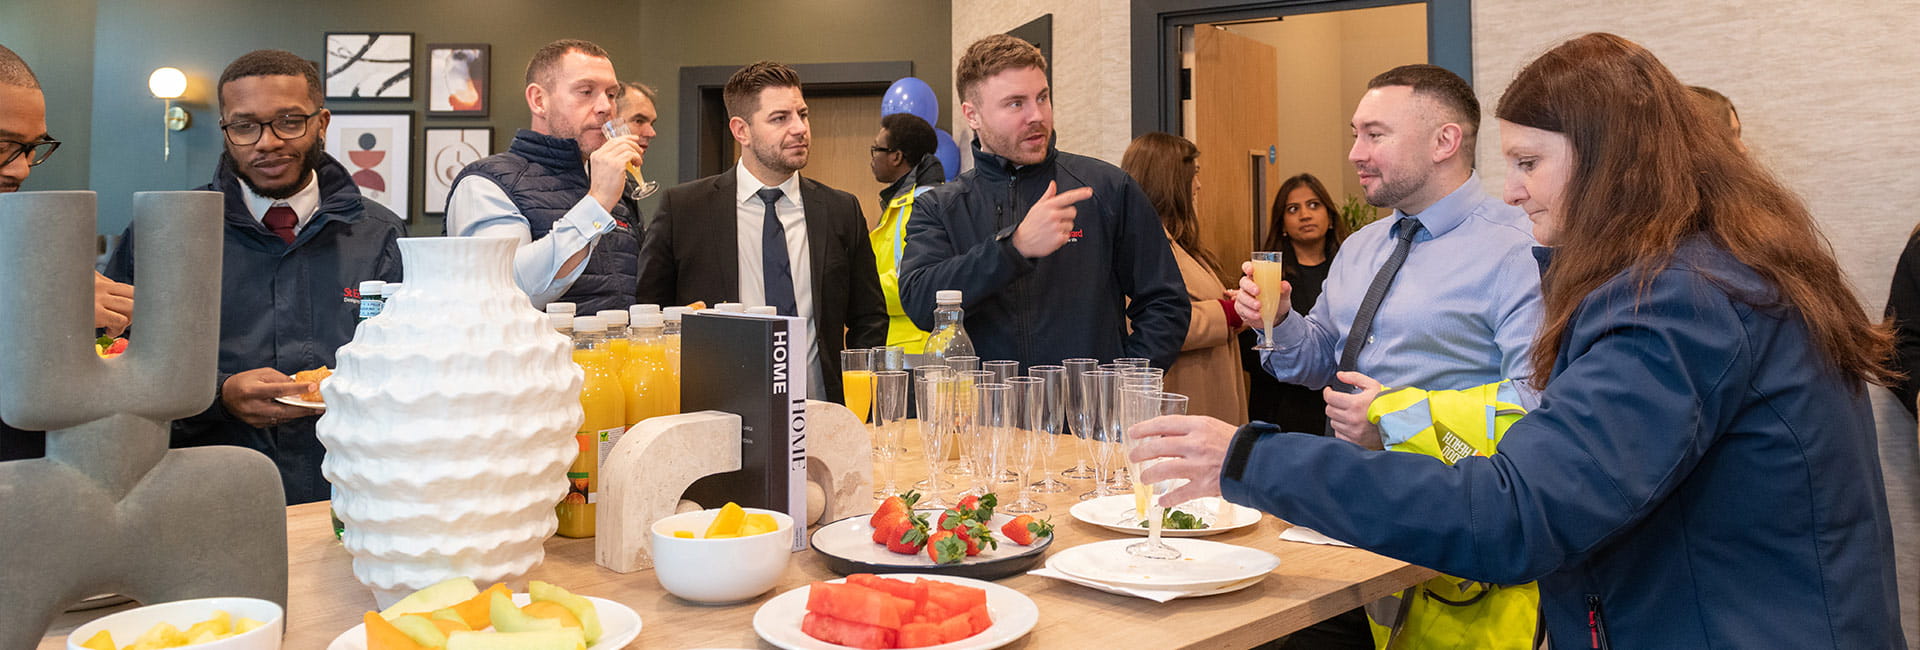 News and Insights - St Edward and Residents Celebrate the Launch of The Residents' Club 51, The Latest Milestone at Bankside Gardens